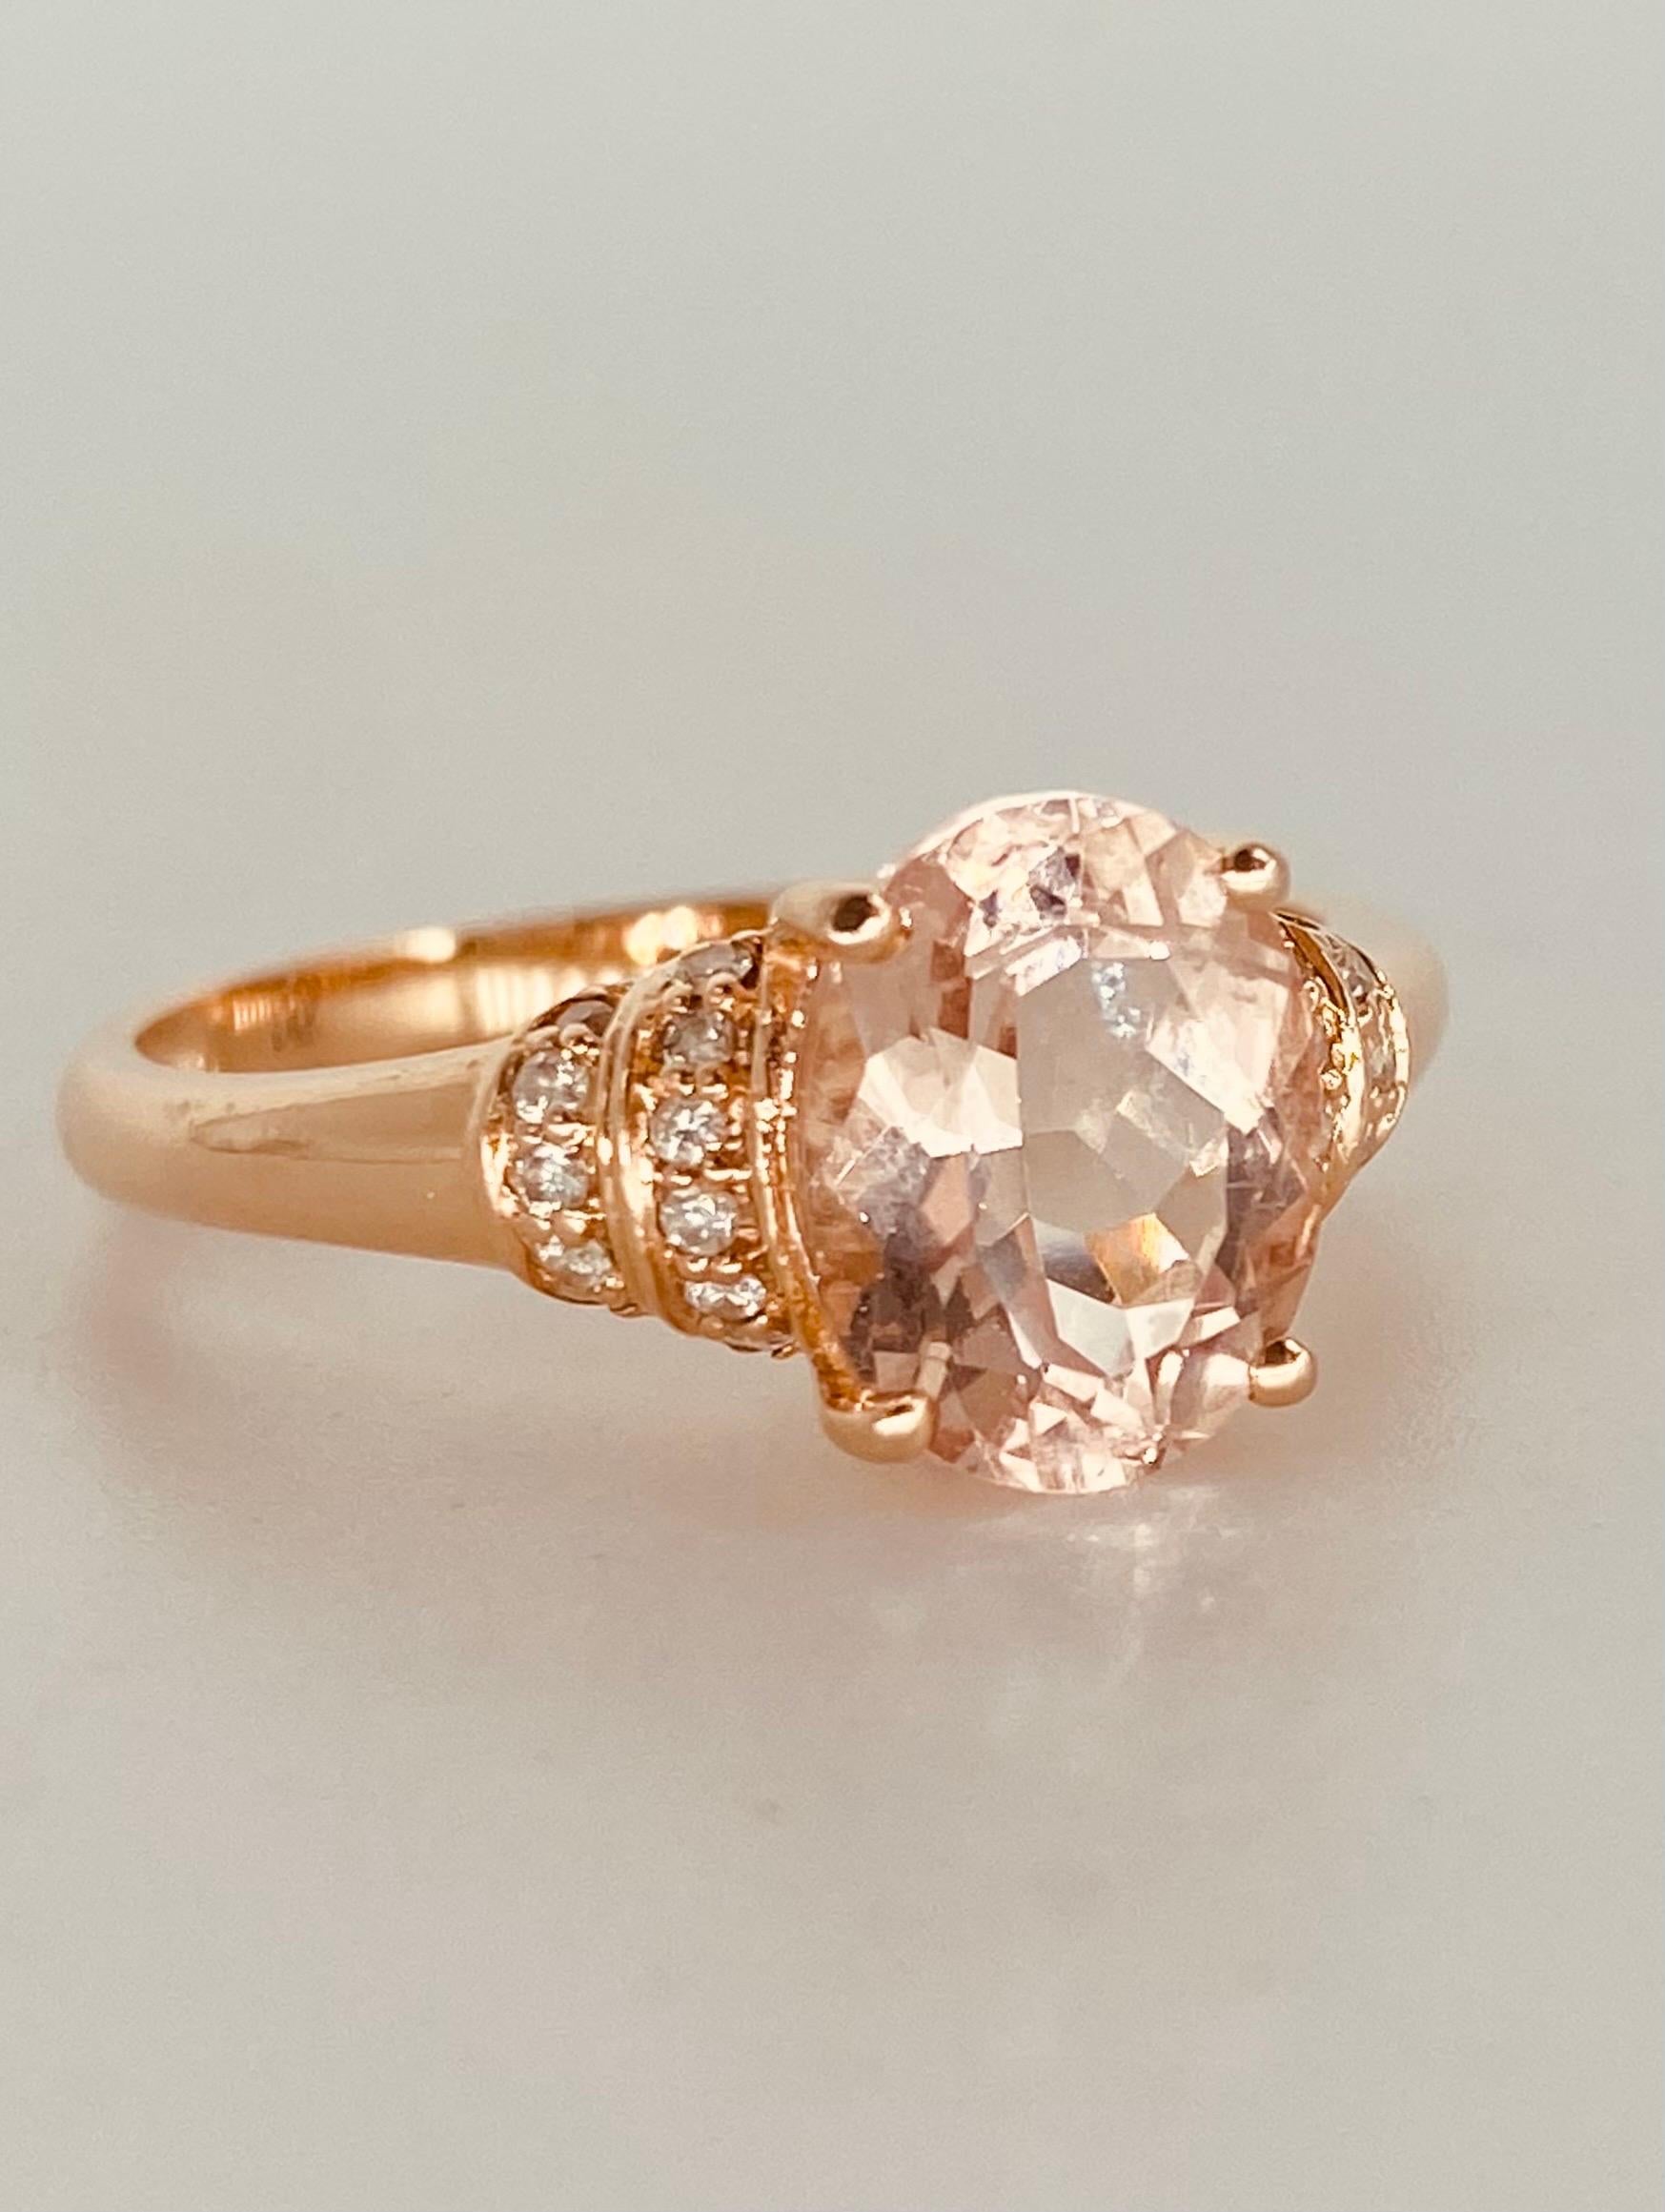 Designer 1.86 Carat Tourmaline & Diamonds Engagement Ring 14k Rose Gold. The ring features center tourmaline gemstone surrounded by approx 0.30 carat white diamonds. The ring is made in 14k solid rose gold and is a size 7 and weights 2.6 grams.